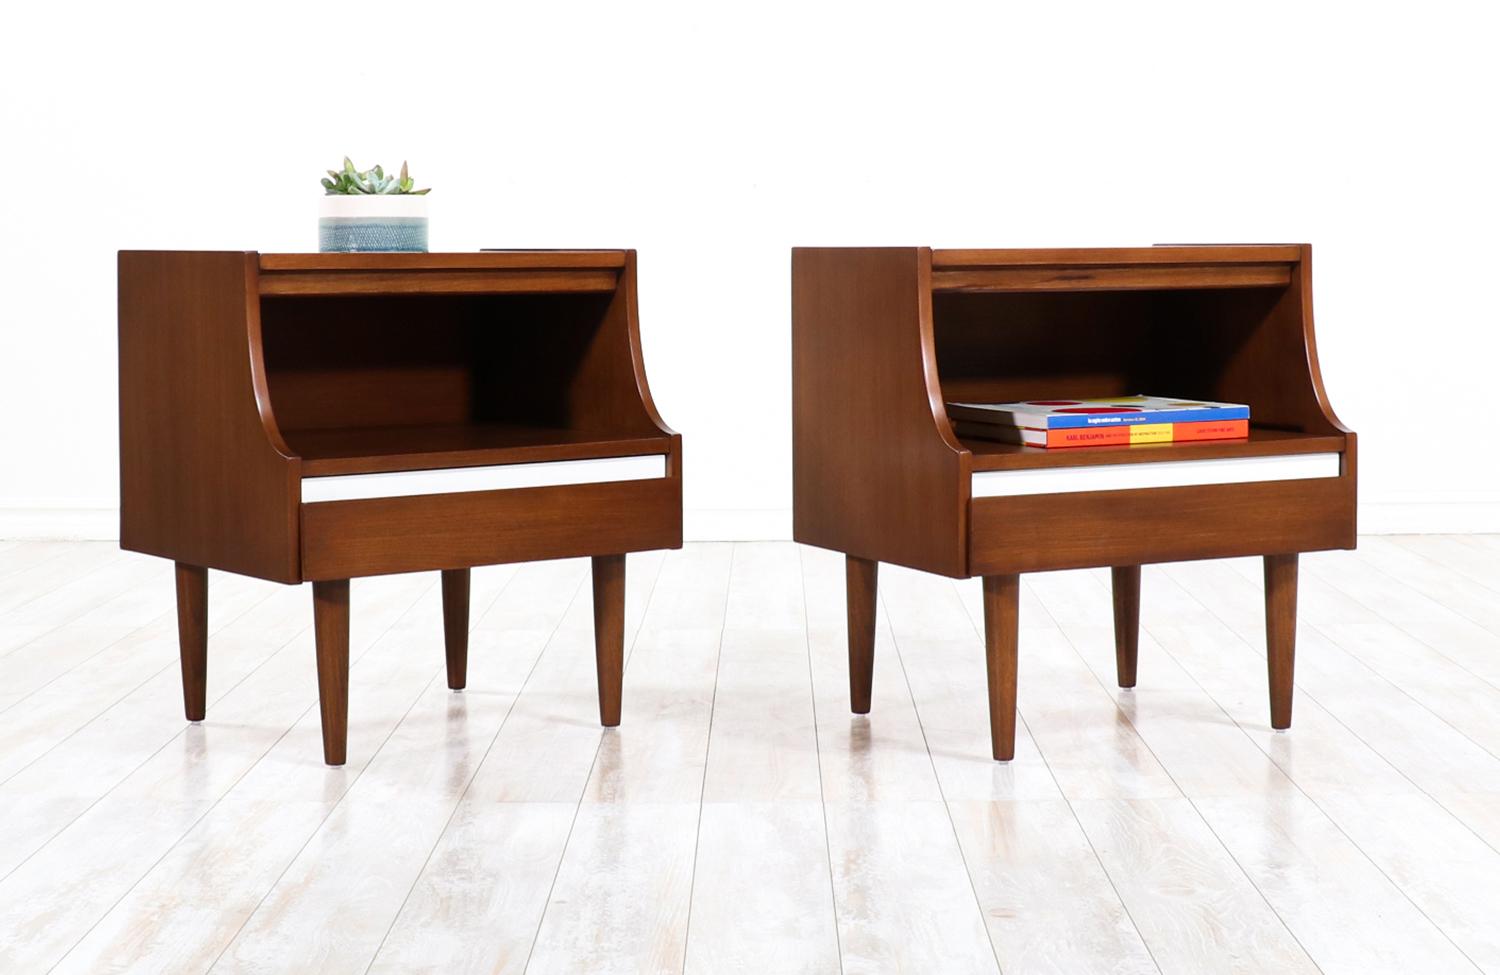 Expertly Restored - Mid-Century Modern Nightstands by American of Martinsville In Excellent Condition For Sale In Los Angeles, CA